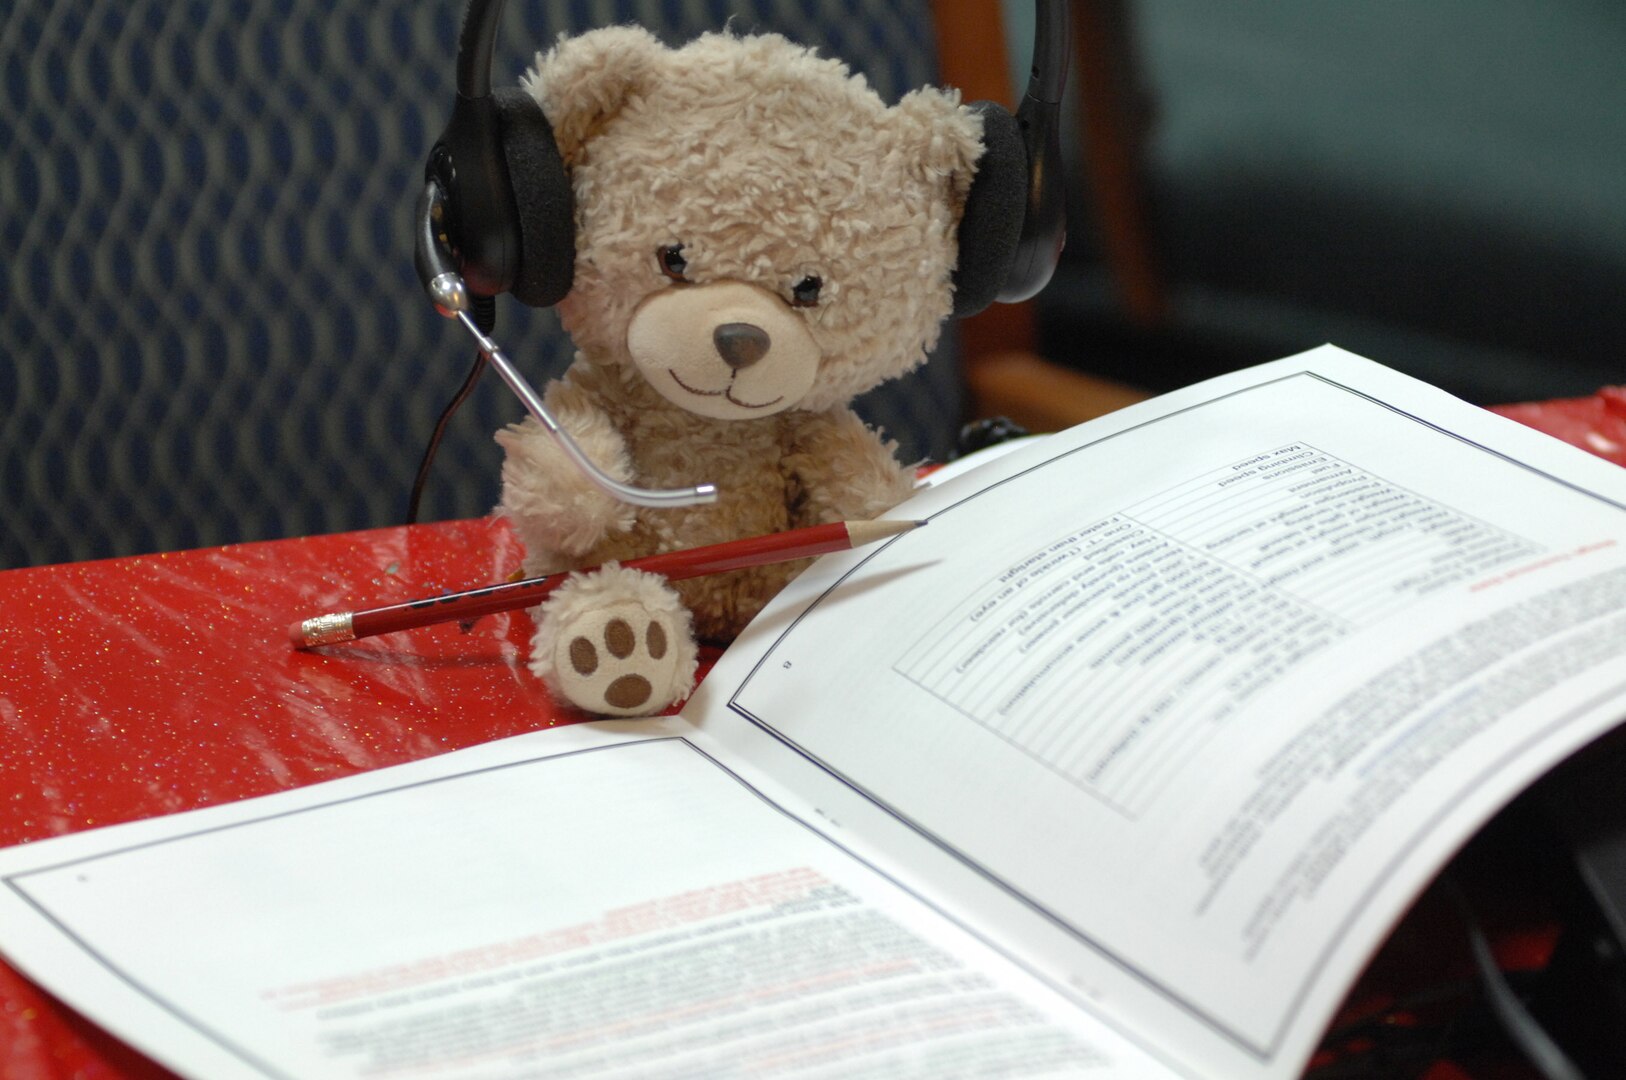 Volunteers at the NORAD Tracks Santa Operations Center on Peterson Air Force Base, Colorado, took time to have fun with equipping a stuffed bear with headset and playbook while answering calls and emails from children and parents across the globe tracking Santa's movements and statistics.